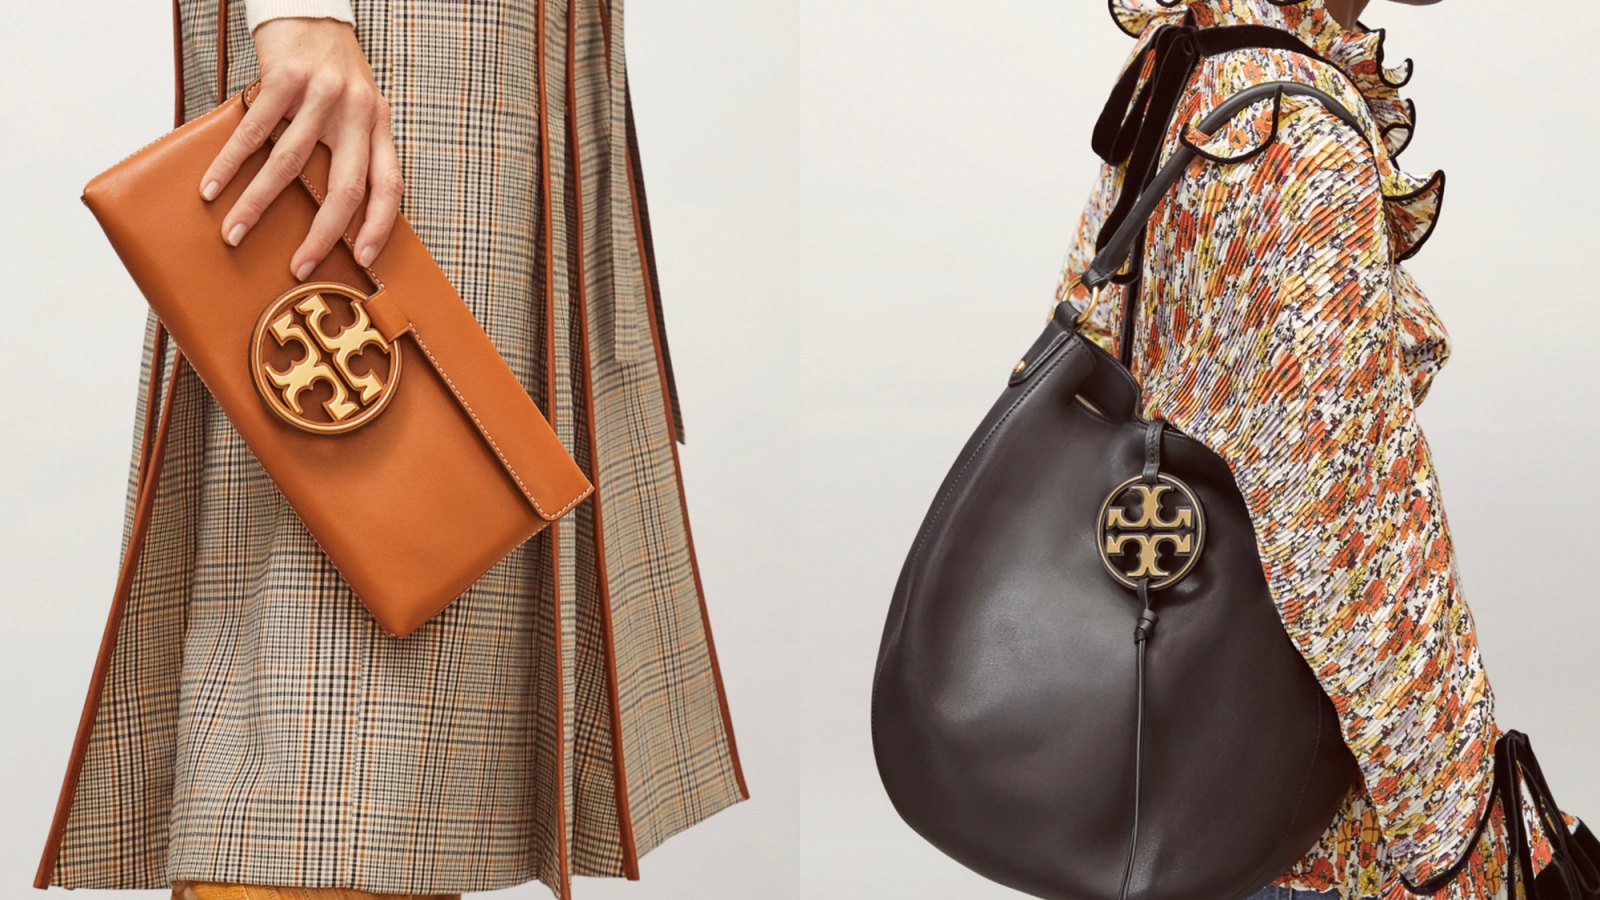 TORY BURCH OUTLET, NEW COLLECTION 2022, UP TO 40% OFF SALE